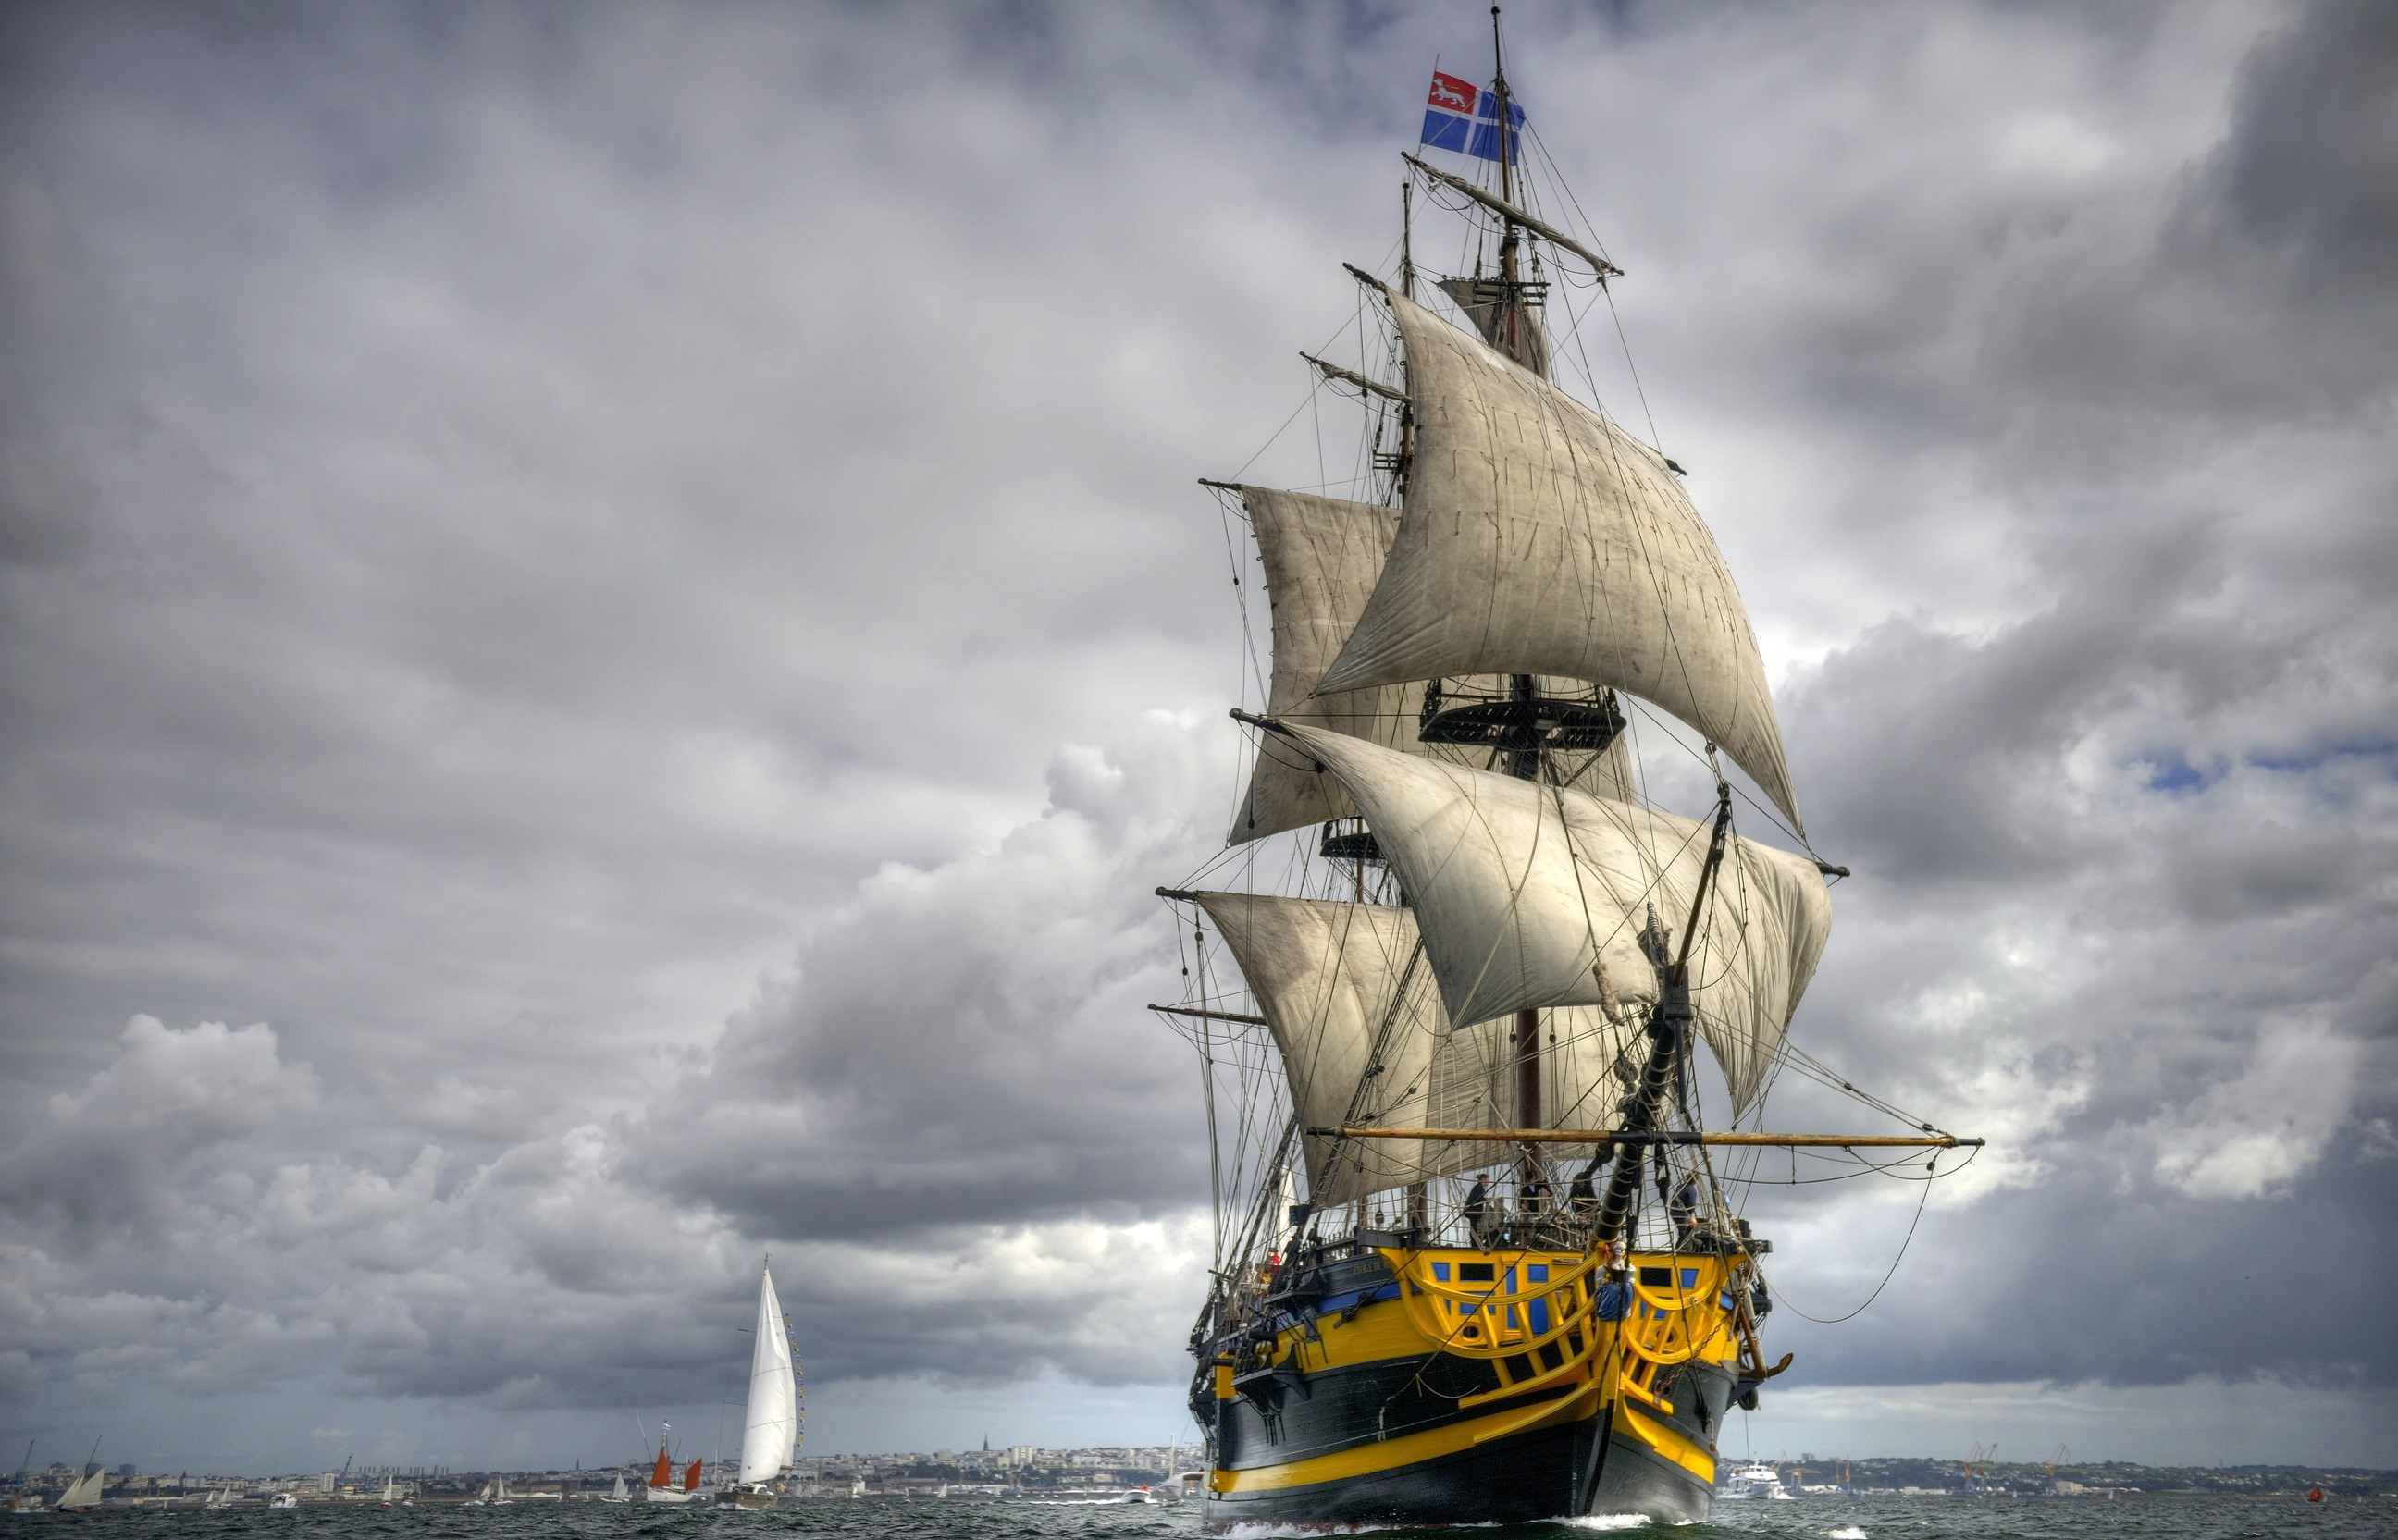 Ship Wallpaper Images in HD Available Here For Download 2592x1665